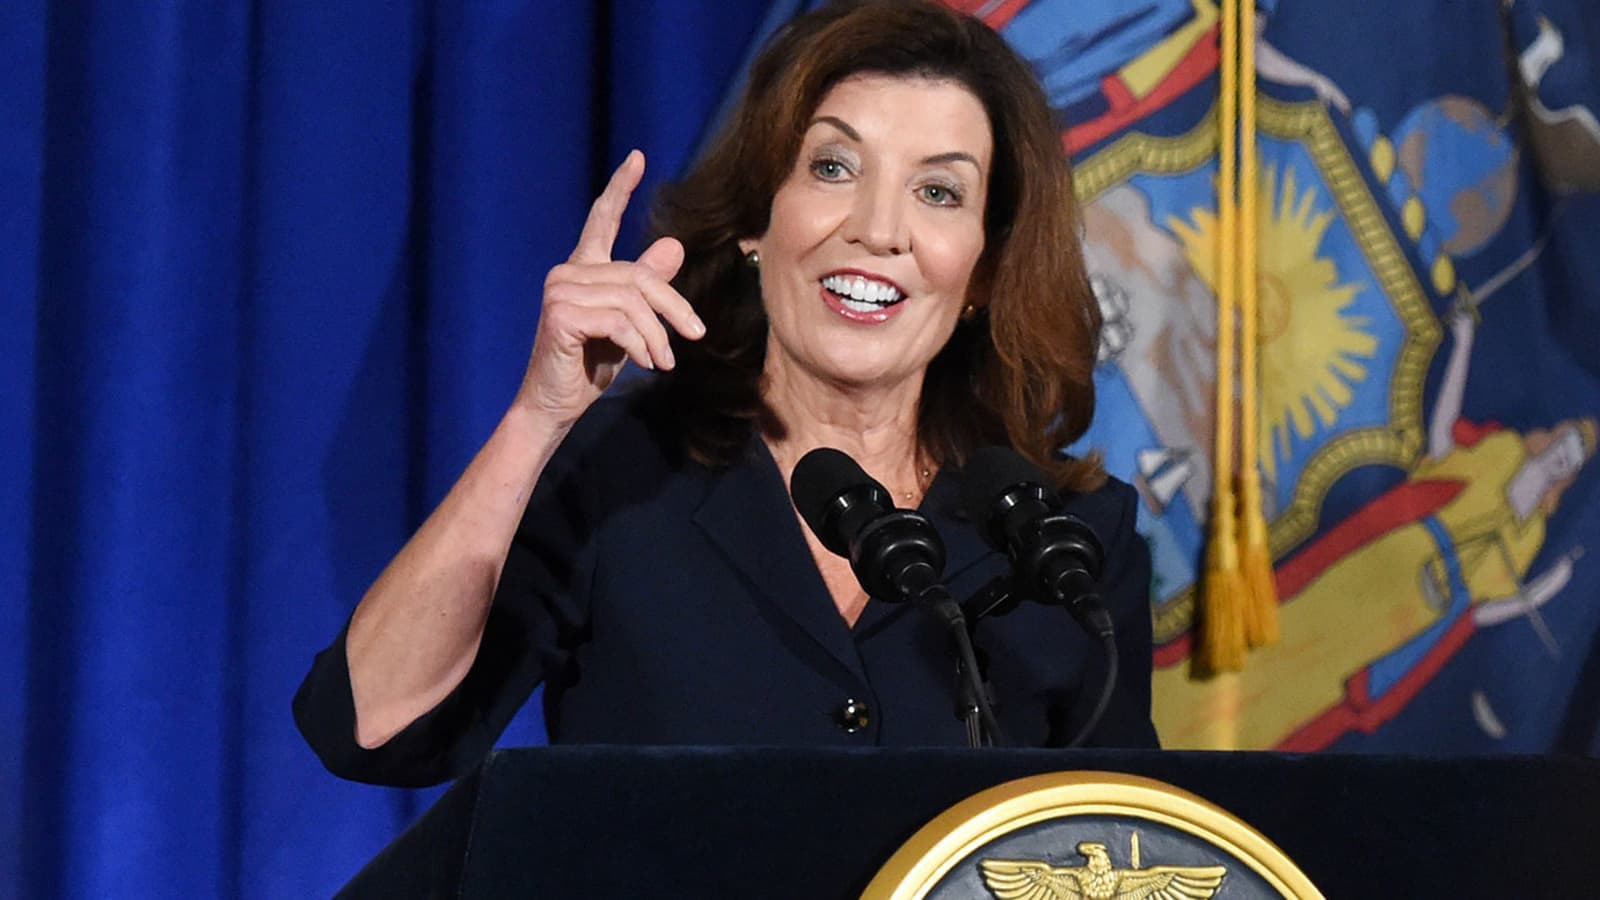 Kathy Hochul vows culture change after Cuomo resigned amid scandal